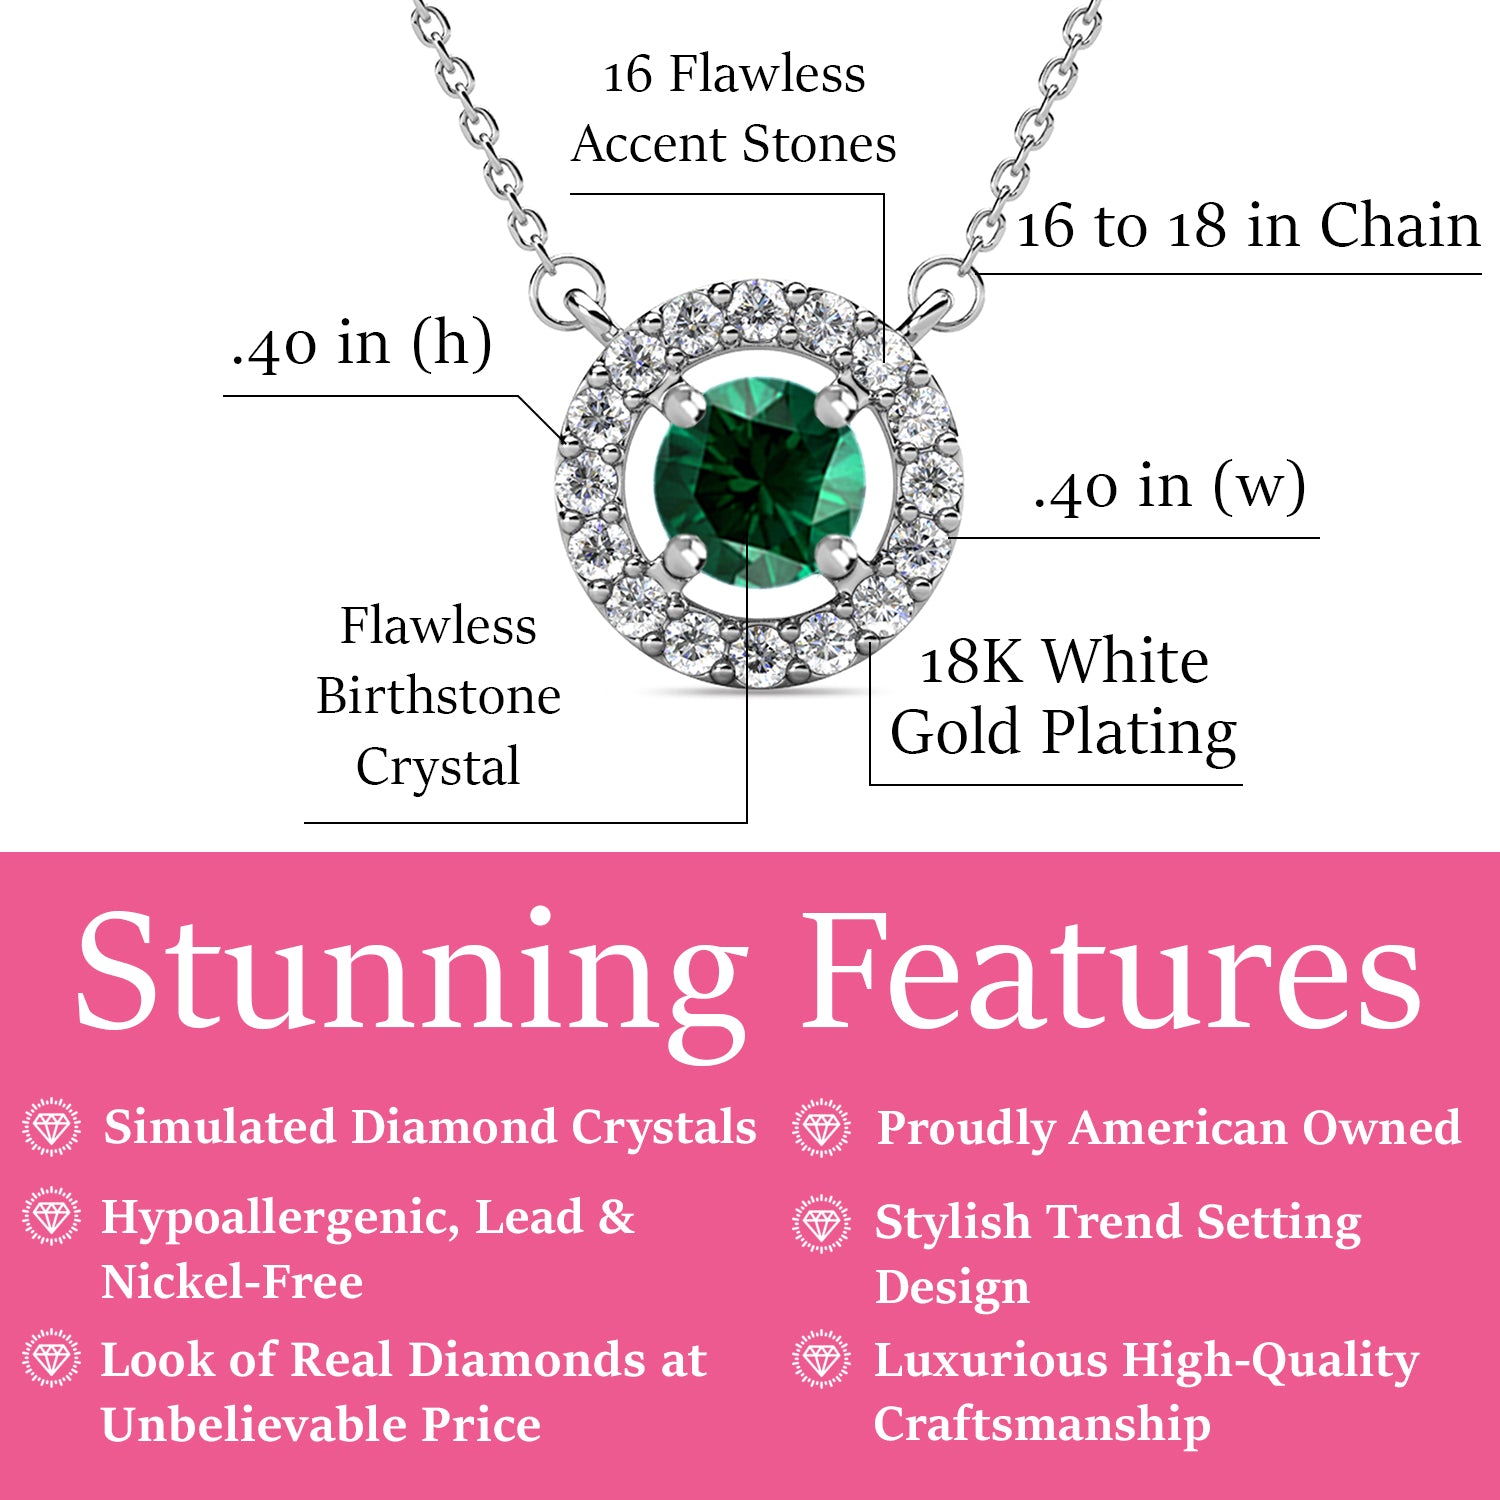 Royal May Birthstone Emerald Necklace, 18k White Gold Plated Silver Halo Necklace with Round Cut Crystal